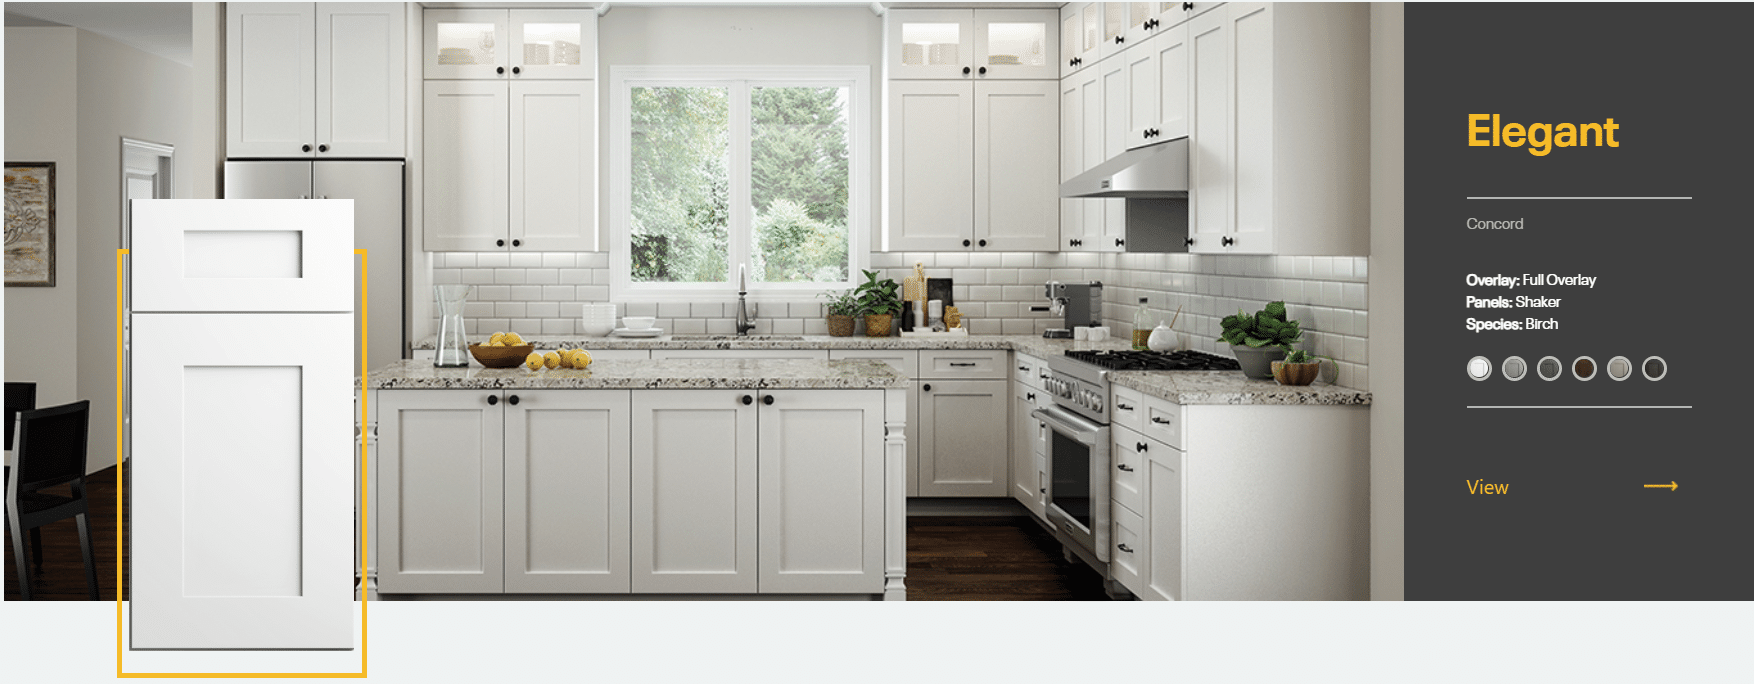 Kitchen Cabinets In Baltimore Vanity, Just Cabinets Locations Maryland